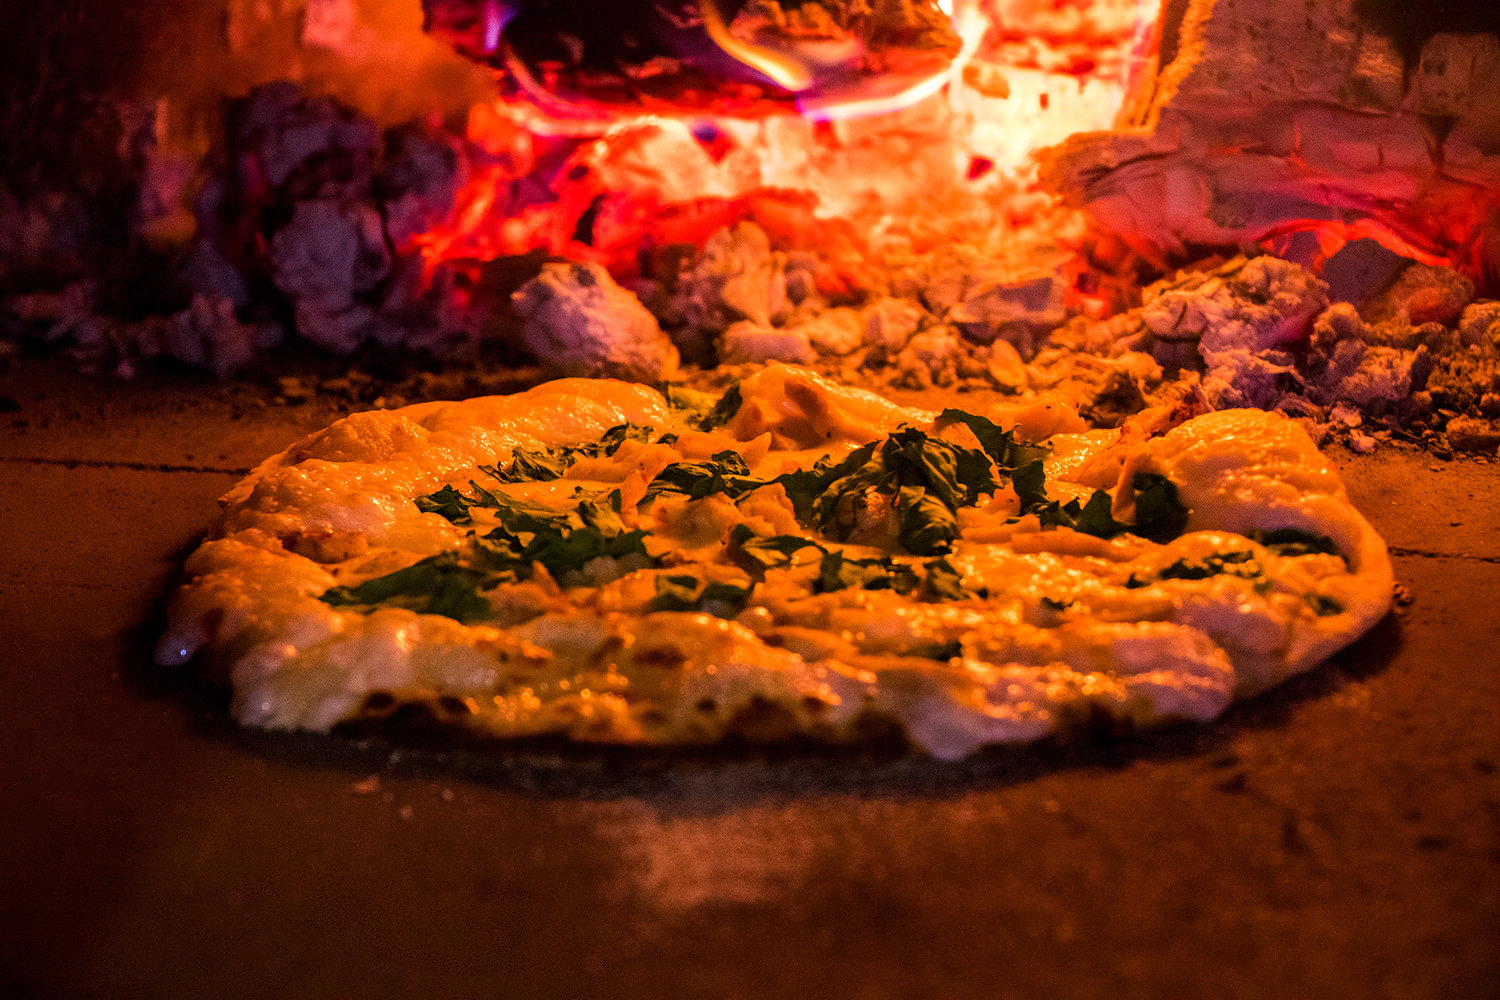 A garlic chicken pizza cooks in a wood fire oven inside the Milltown Pizza food cart Tuesday afternoon in Chehalis.